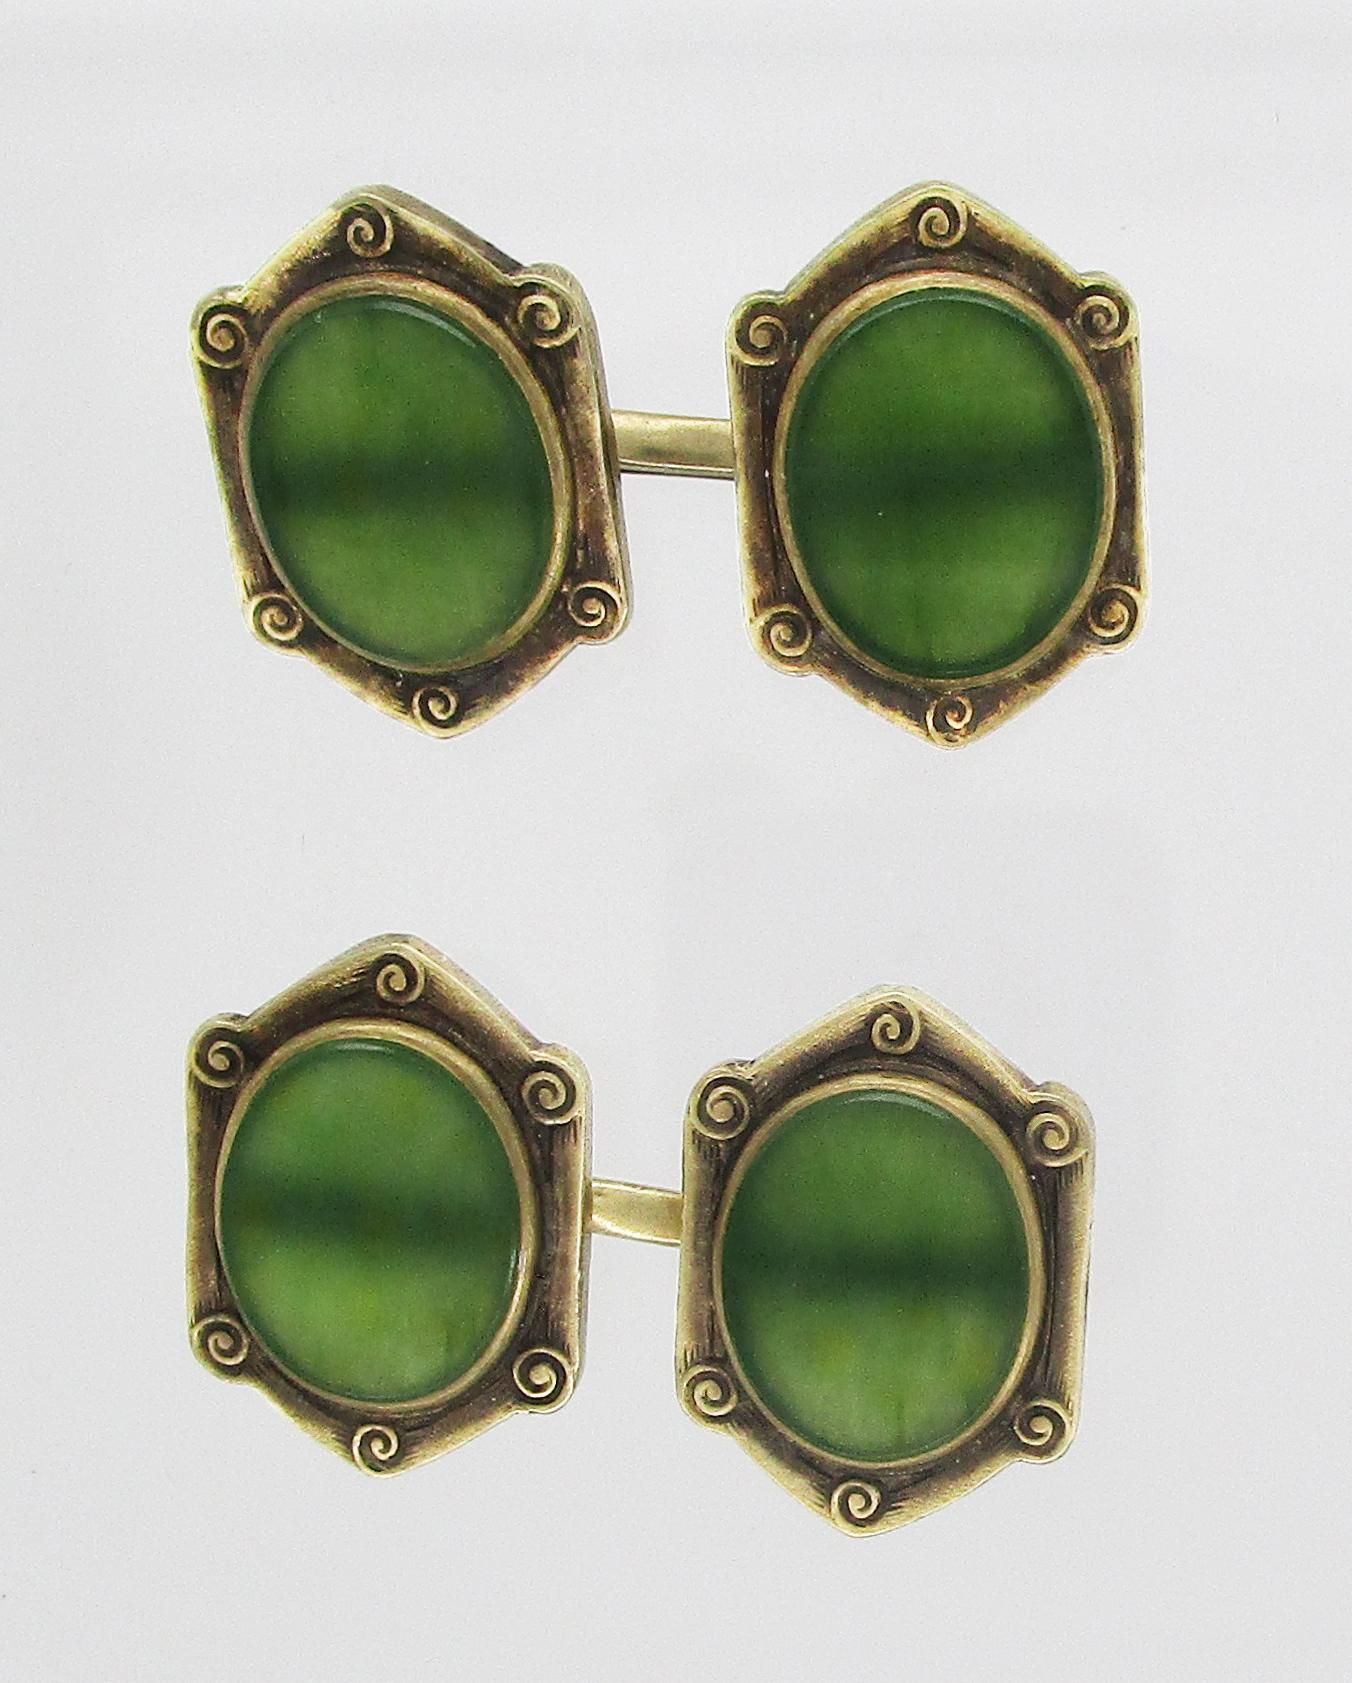 In a magnificent example of the Arts and Crafts design, these cufflinks pair stunning green jade with 14k green gold frames to create the perfect accessory for the distinguished gentleman. The links boast translucent jade panels with a rich green